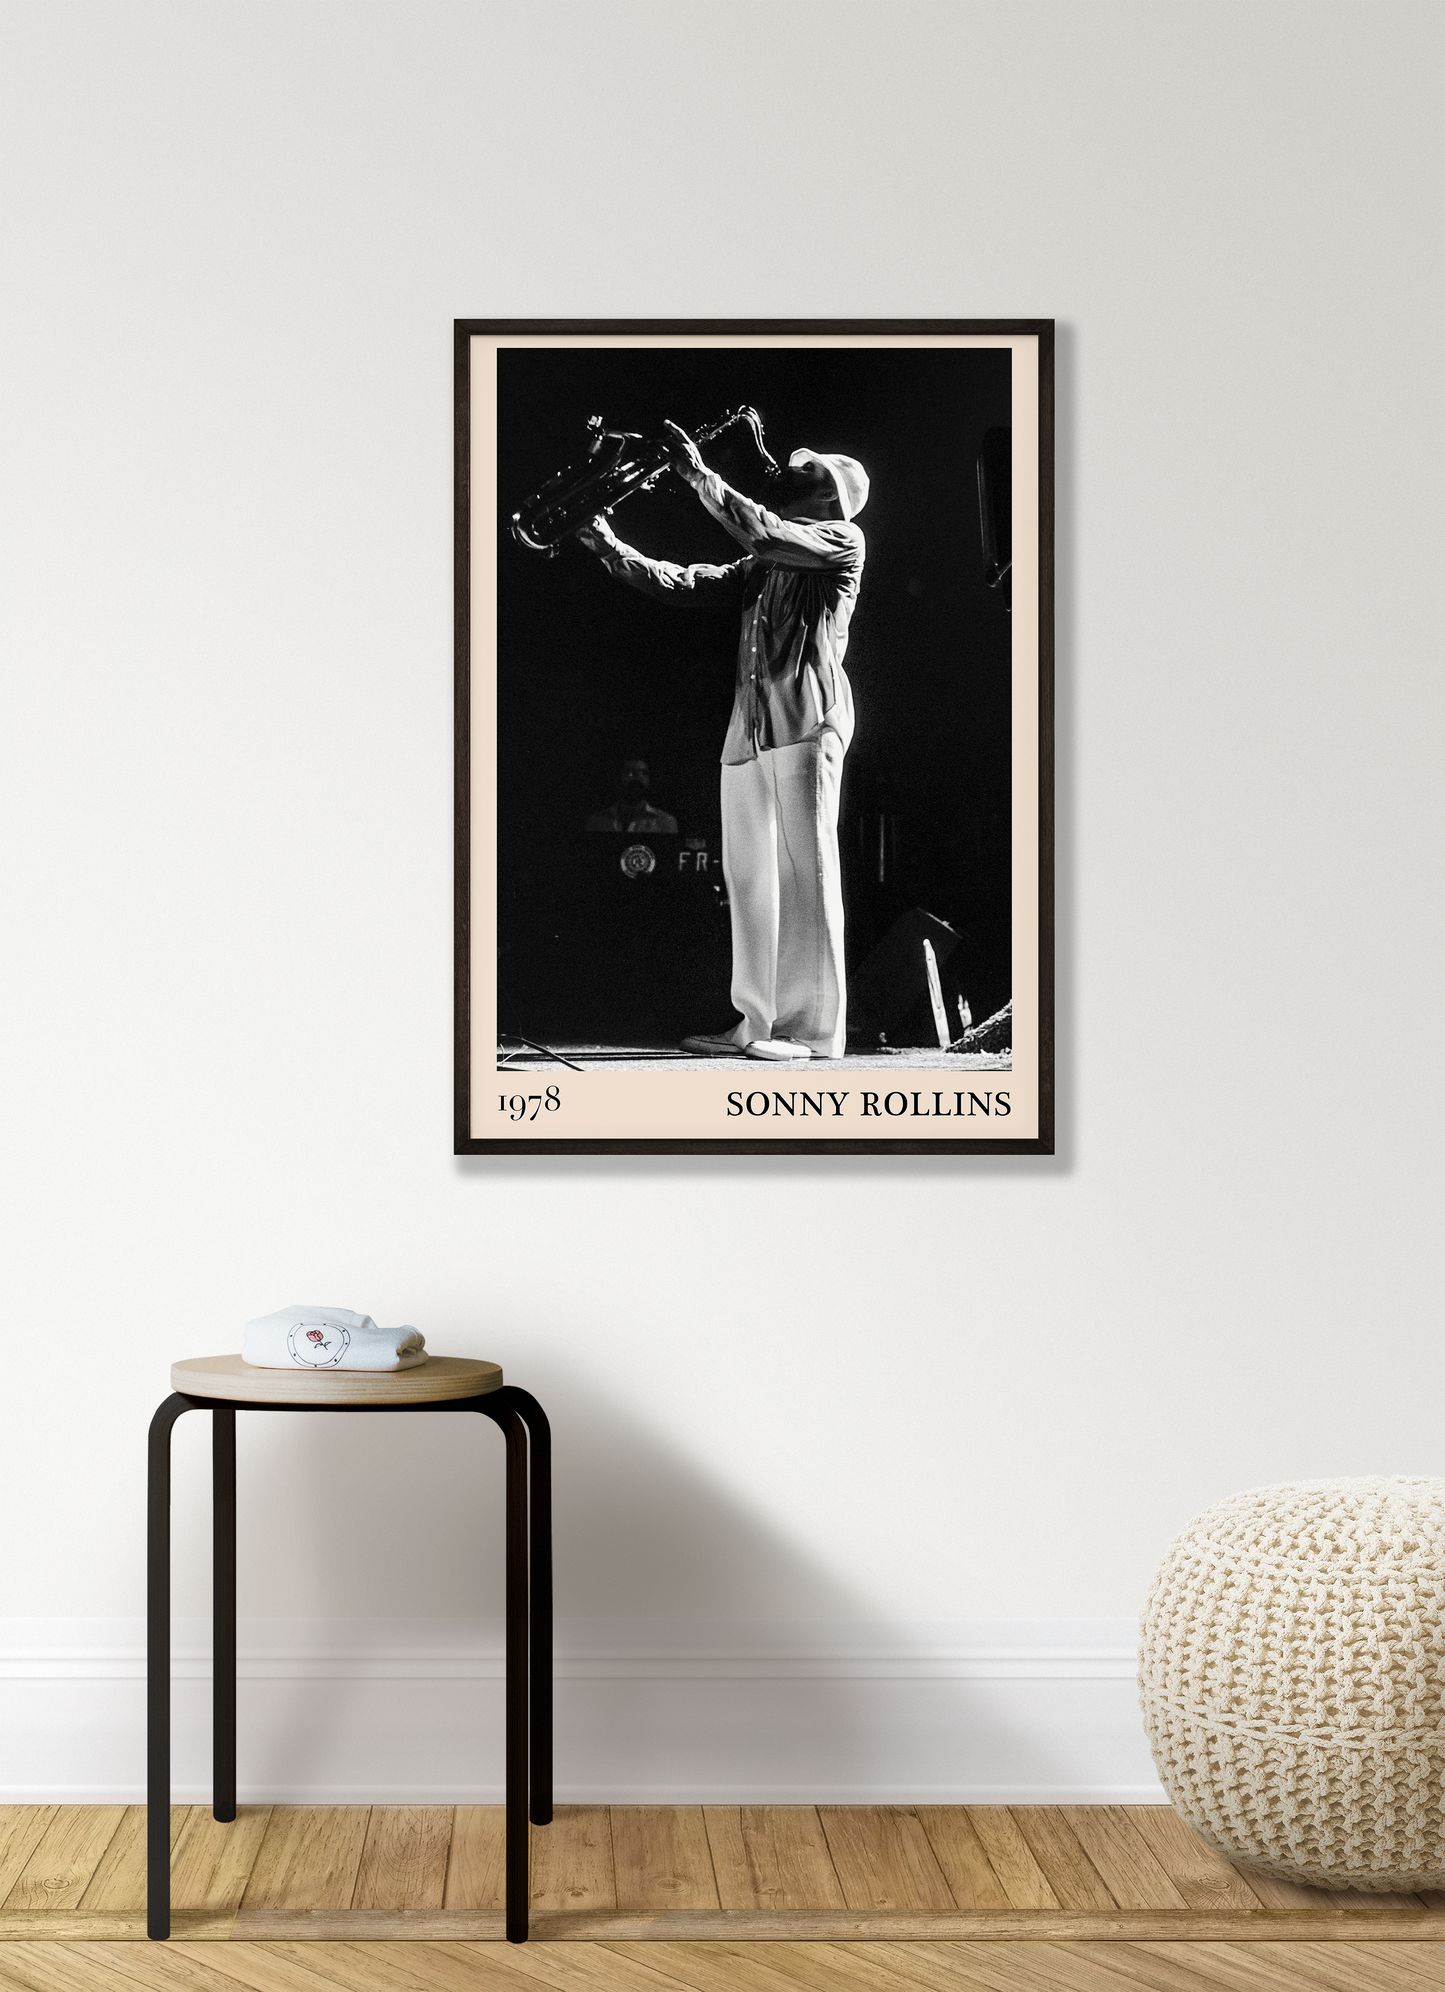 1978 photograph of Sonny Rollins playing the saxophone, transformed into a stylish black-framed jazz print hanging on a grey living room wall